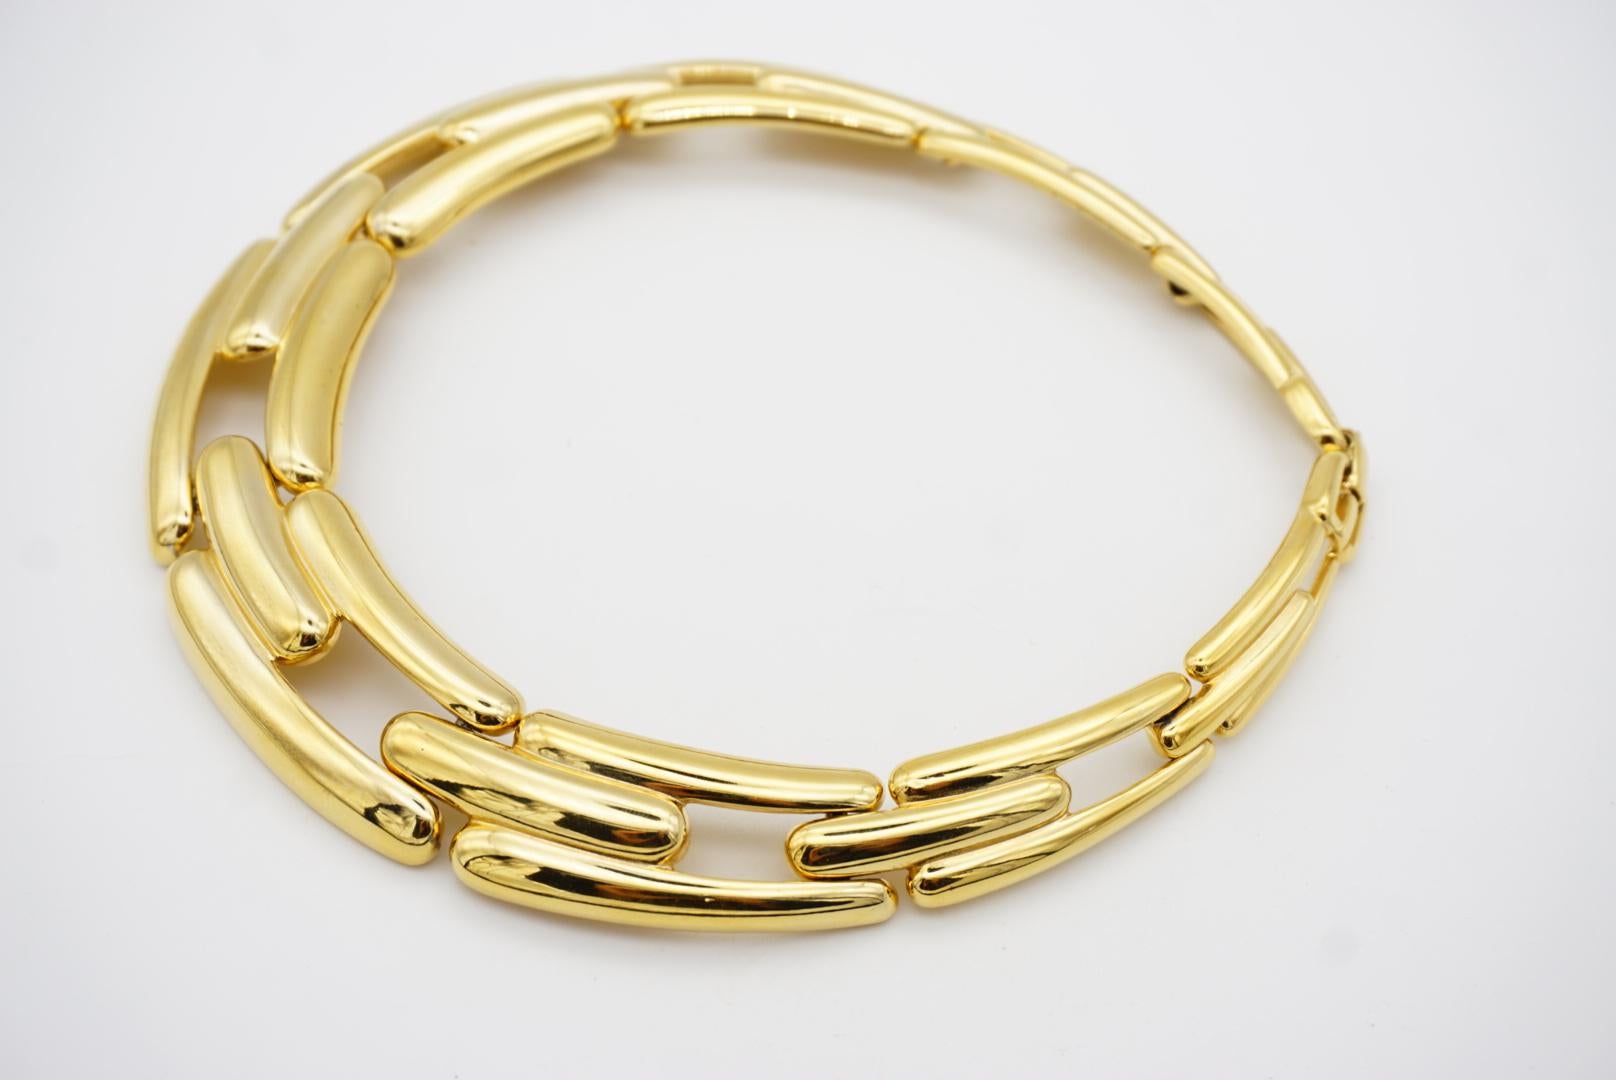 Givenchy Vintage 1980s Chunky Watch Link Interlock Gold Collar Choker Necklace For Sale 2